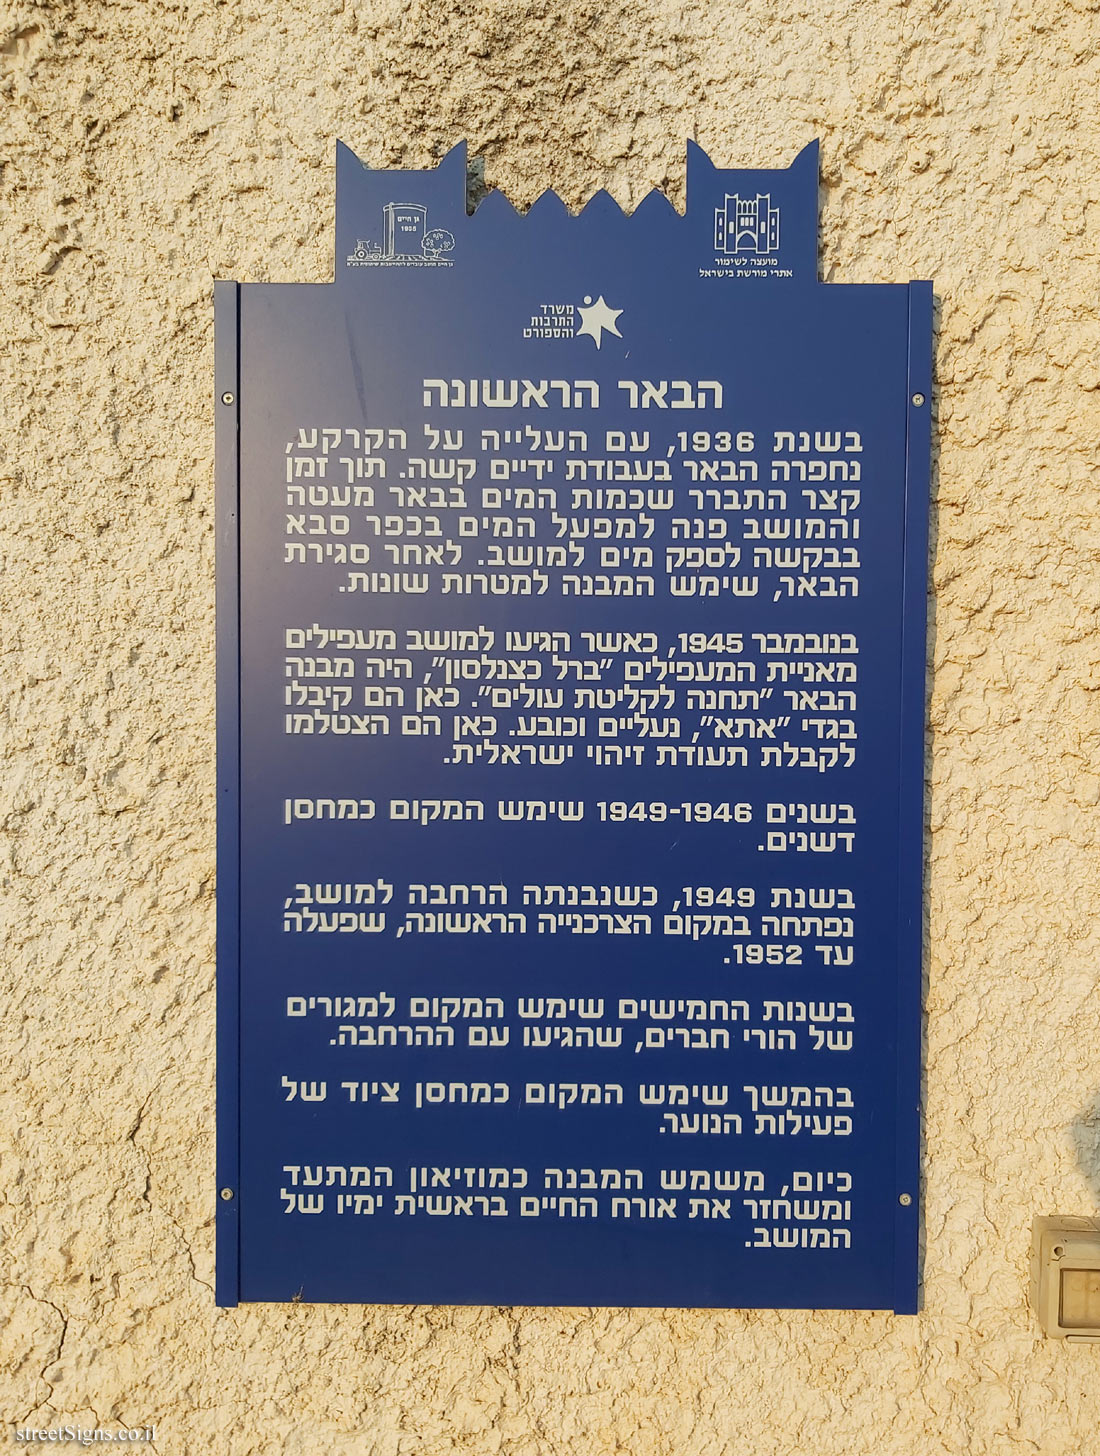 Gan Haim - Heritage Sites in Israel - The first well